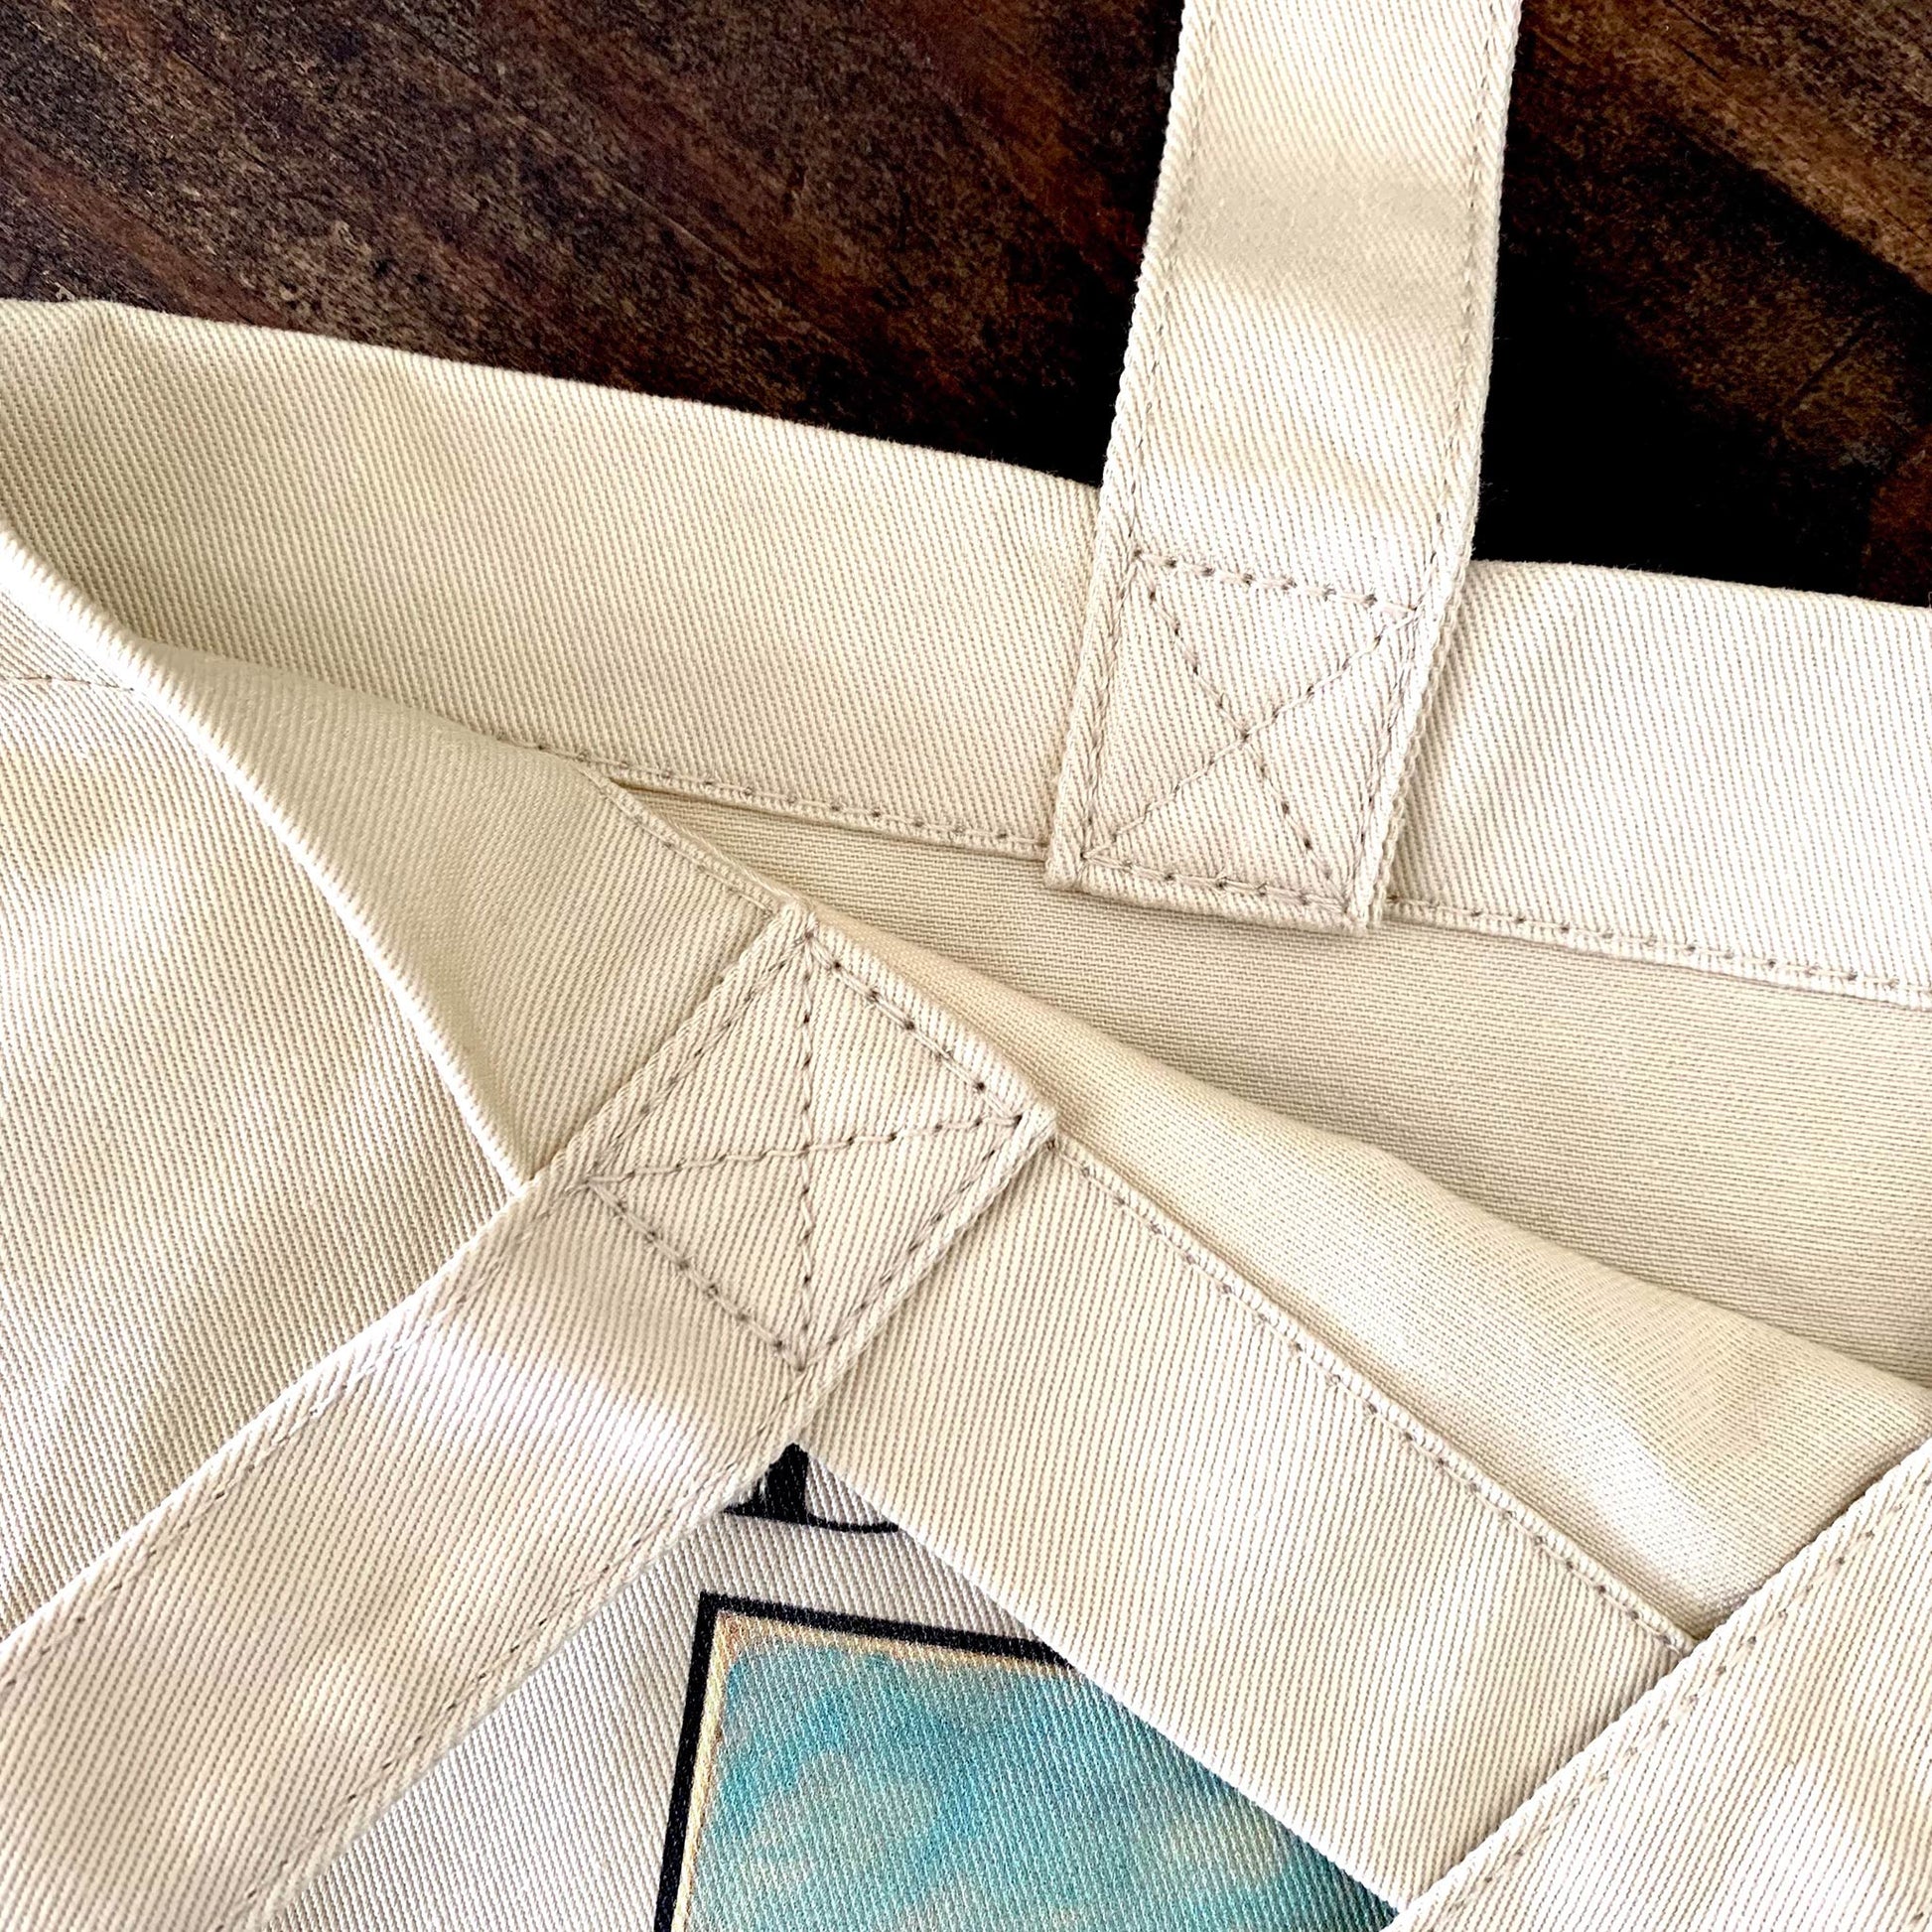 reinforced cross sticking straps. the market tote can carry up to 30 pounds.